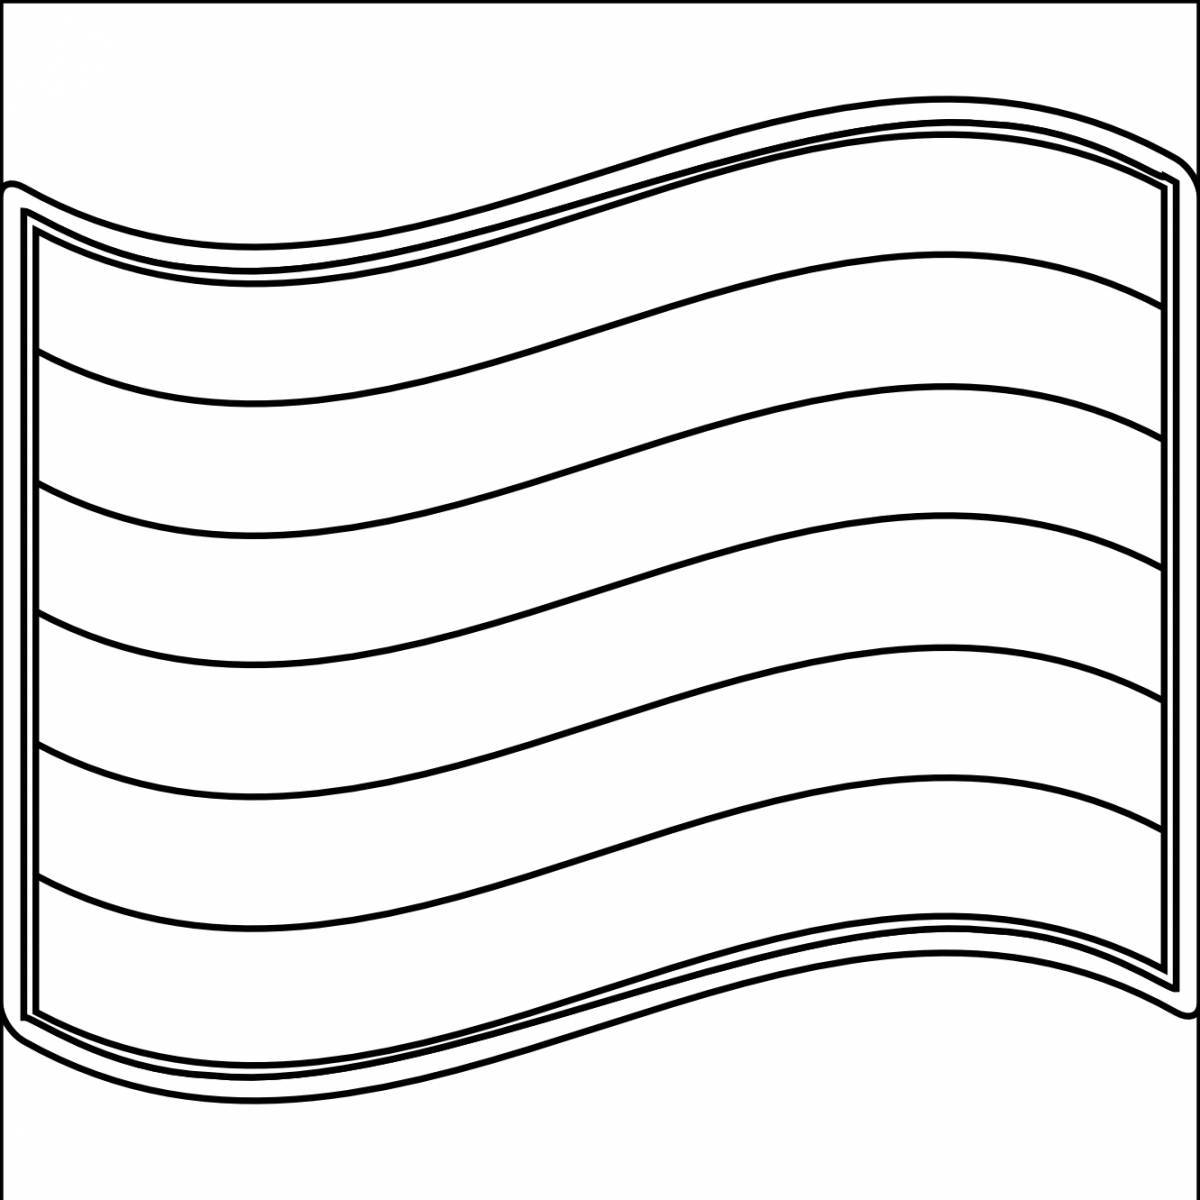 Awesome Russian flag coloring pages for kids